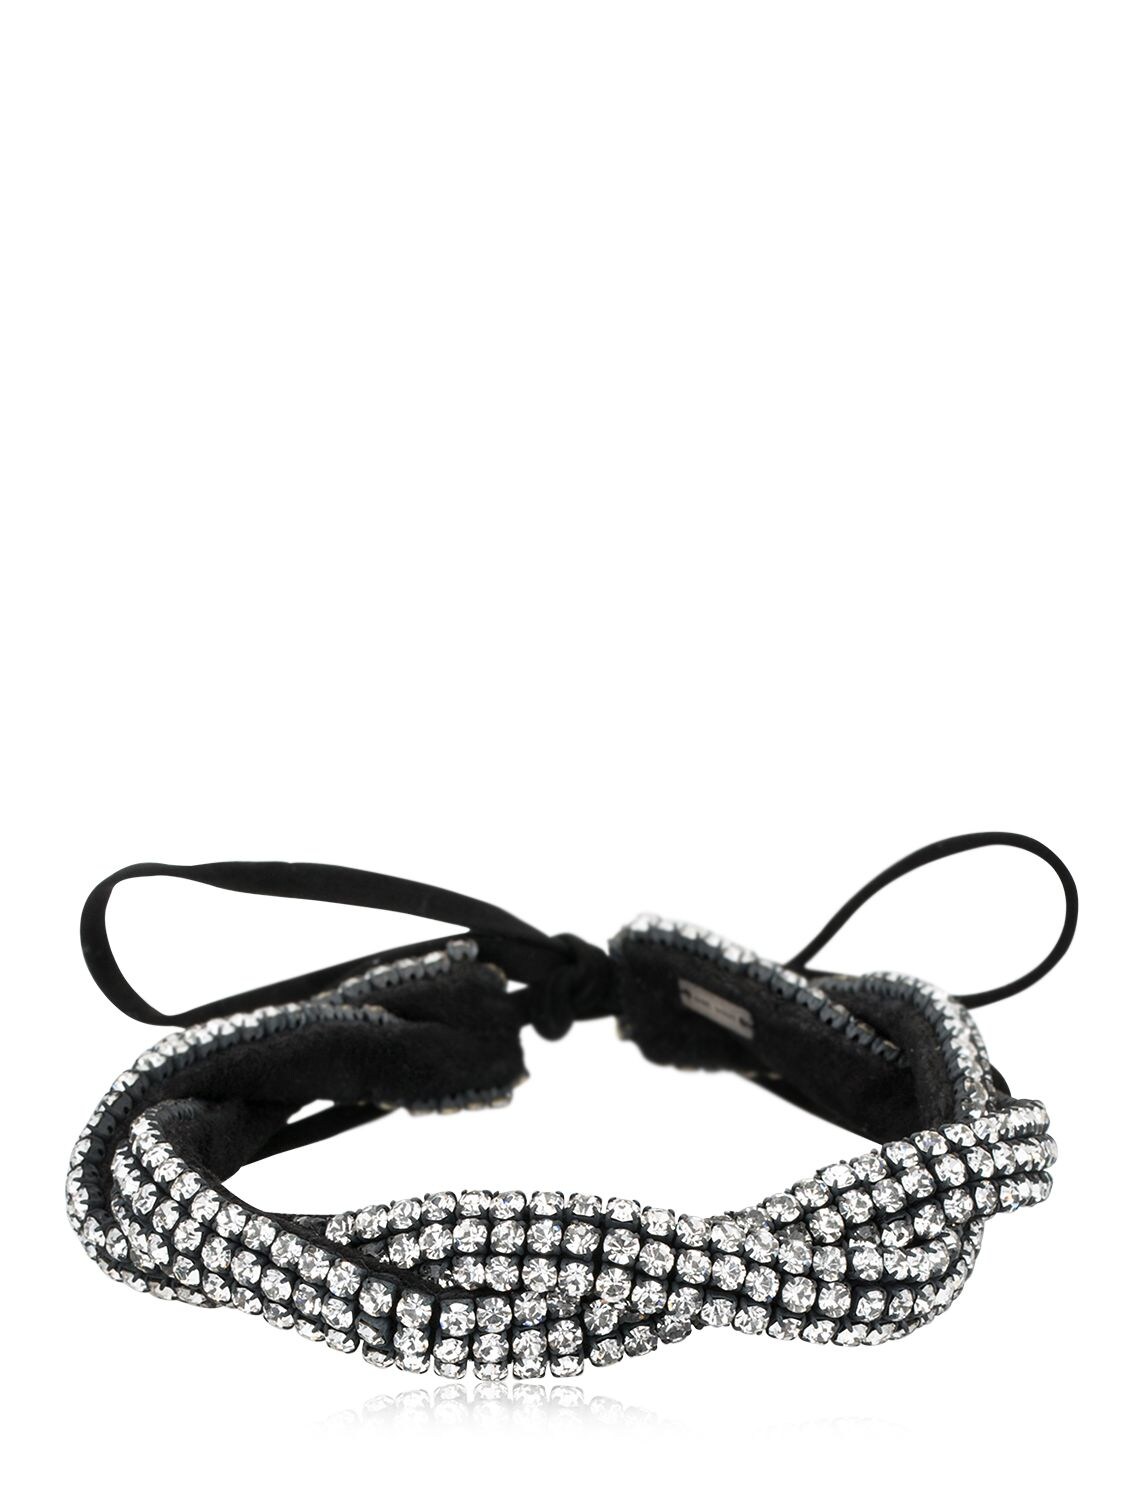 ISABEL MARANT KNOTTED STRASS CHOKER,68I0W3009-MDFCSw2